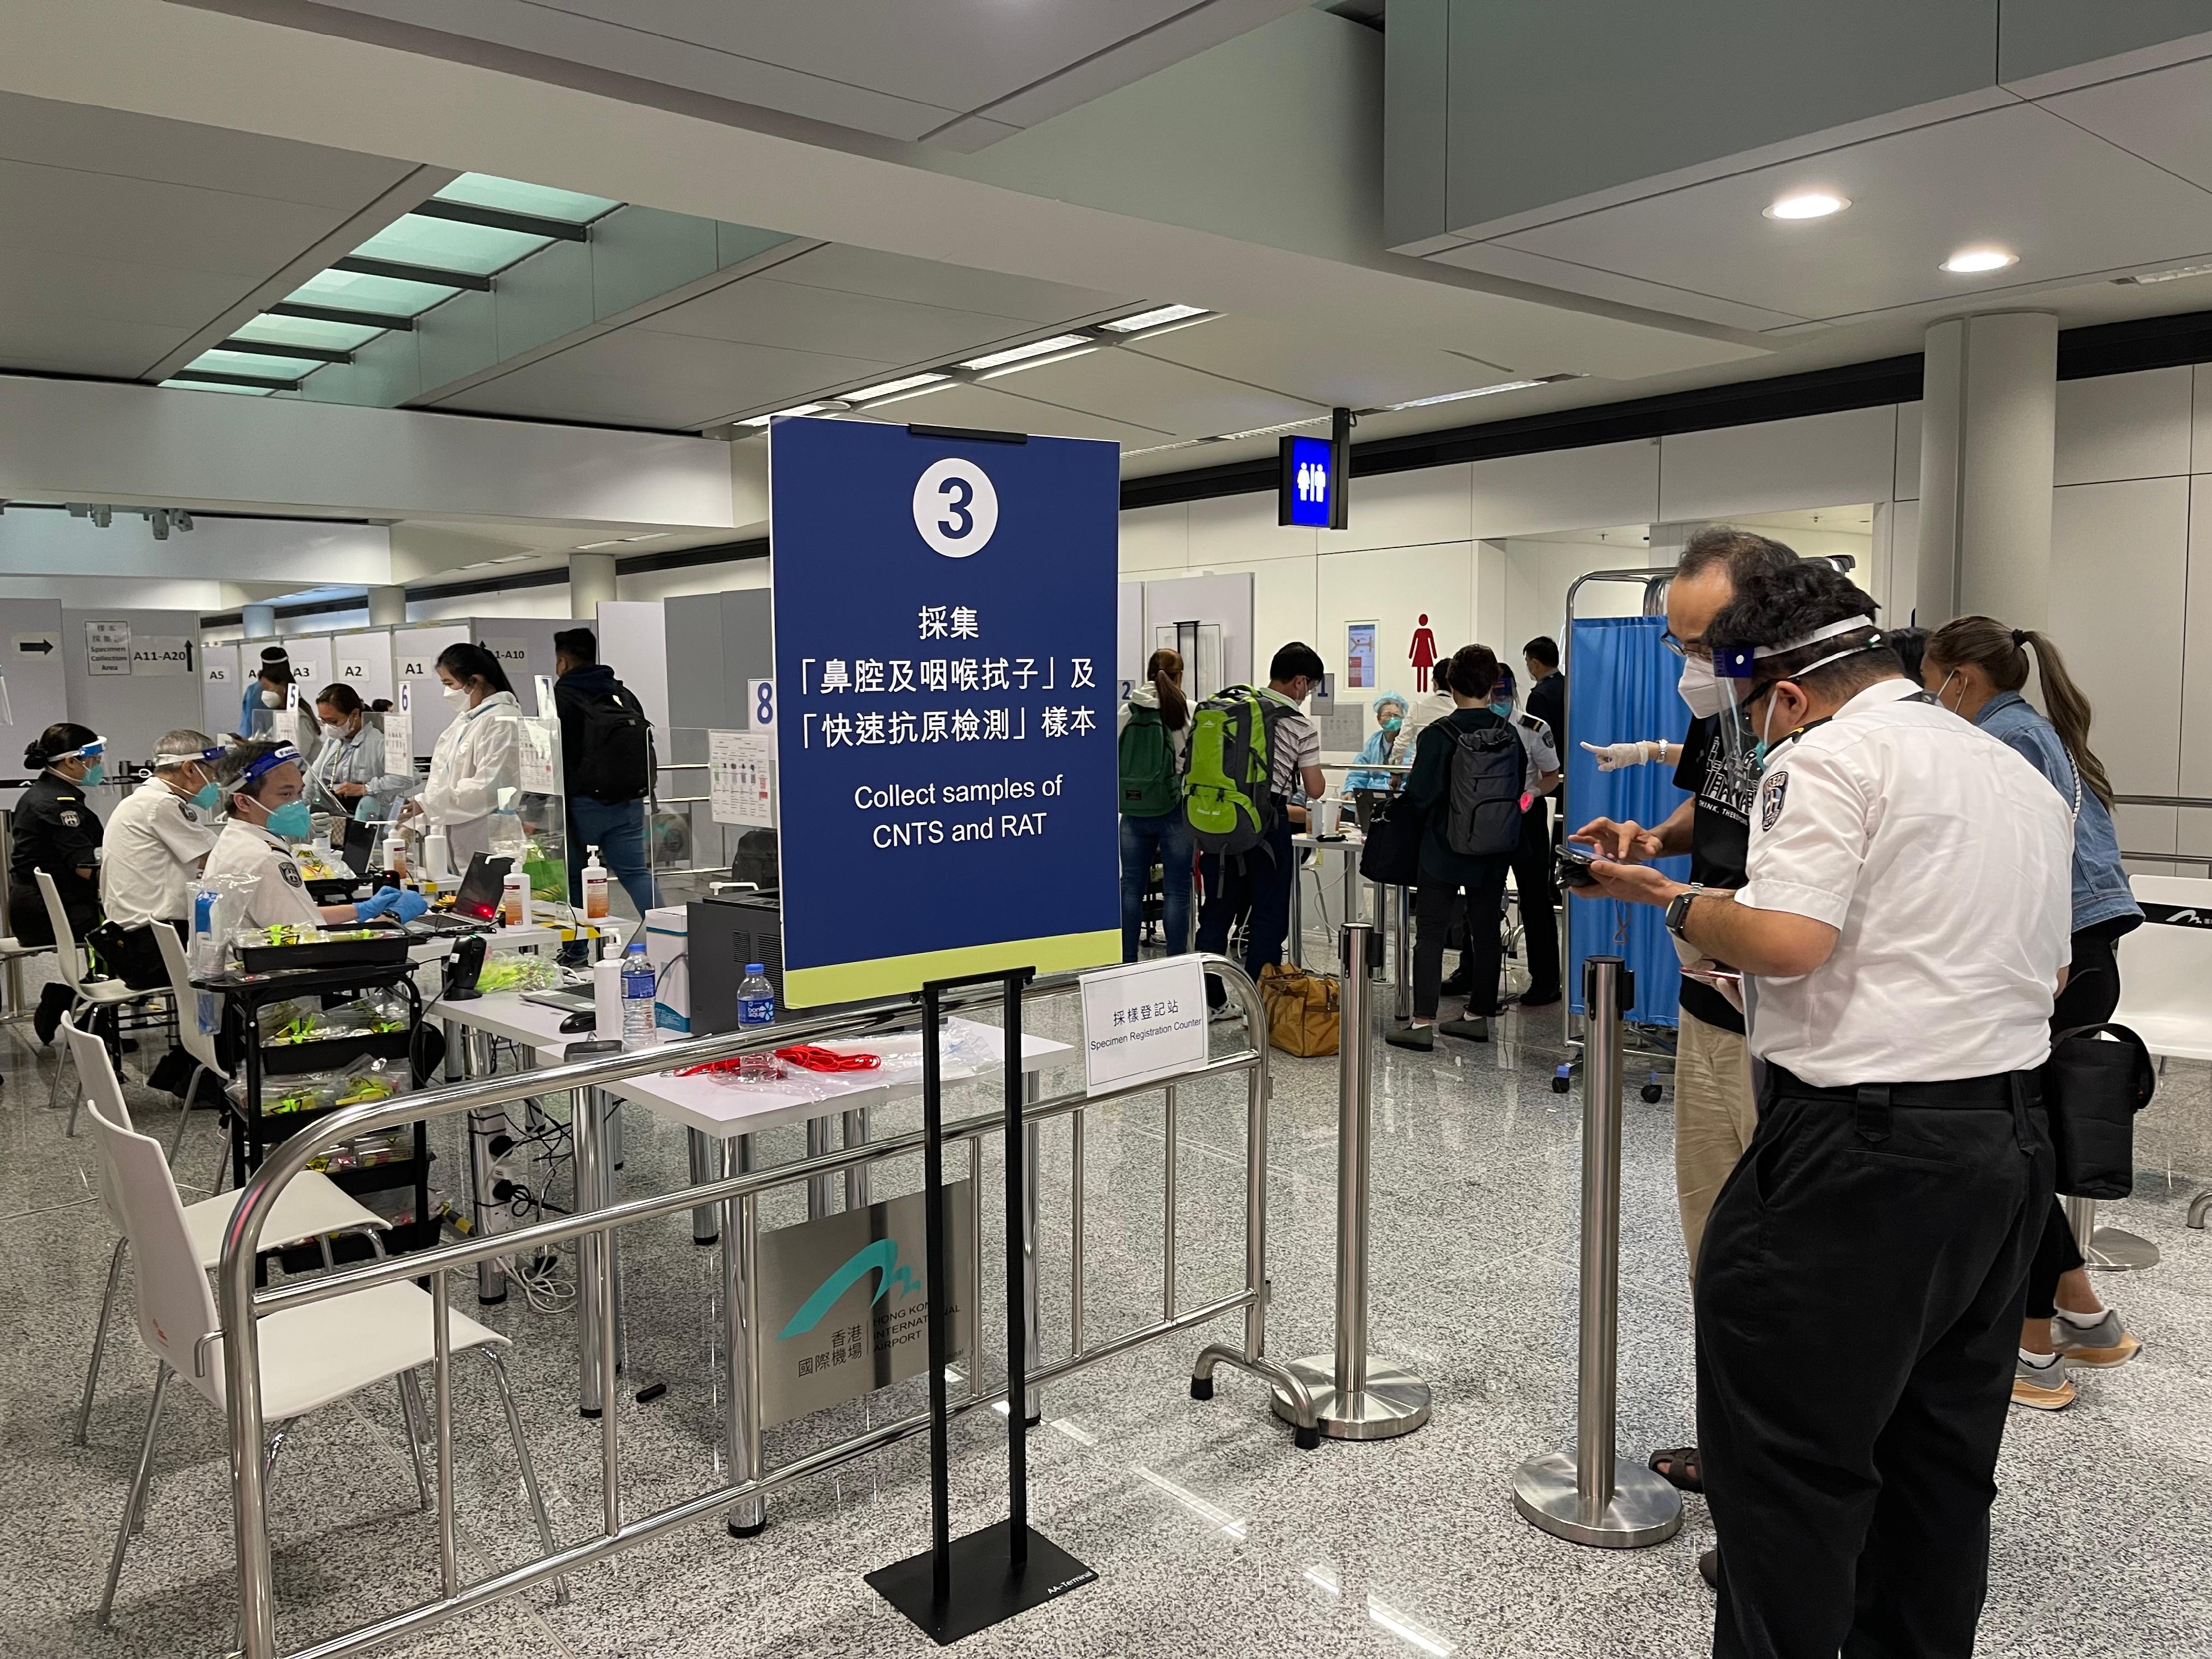 The Government implemented streamlined procedures of arrival quarantine and testing at the airport starting from today (August 12). Specimen collection booths for nucleic acid and rapid antigen tests are set up at the arrival level of Terminal 1 to enable inbound persons to undergo testing soon after landing.